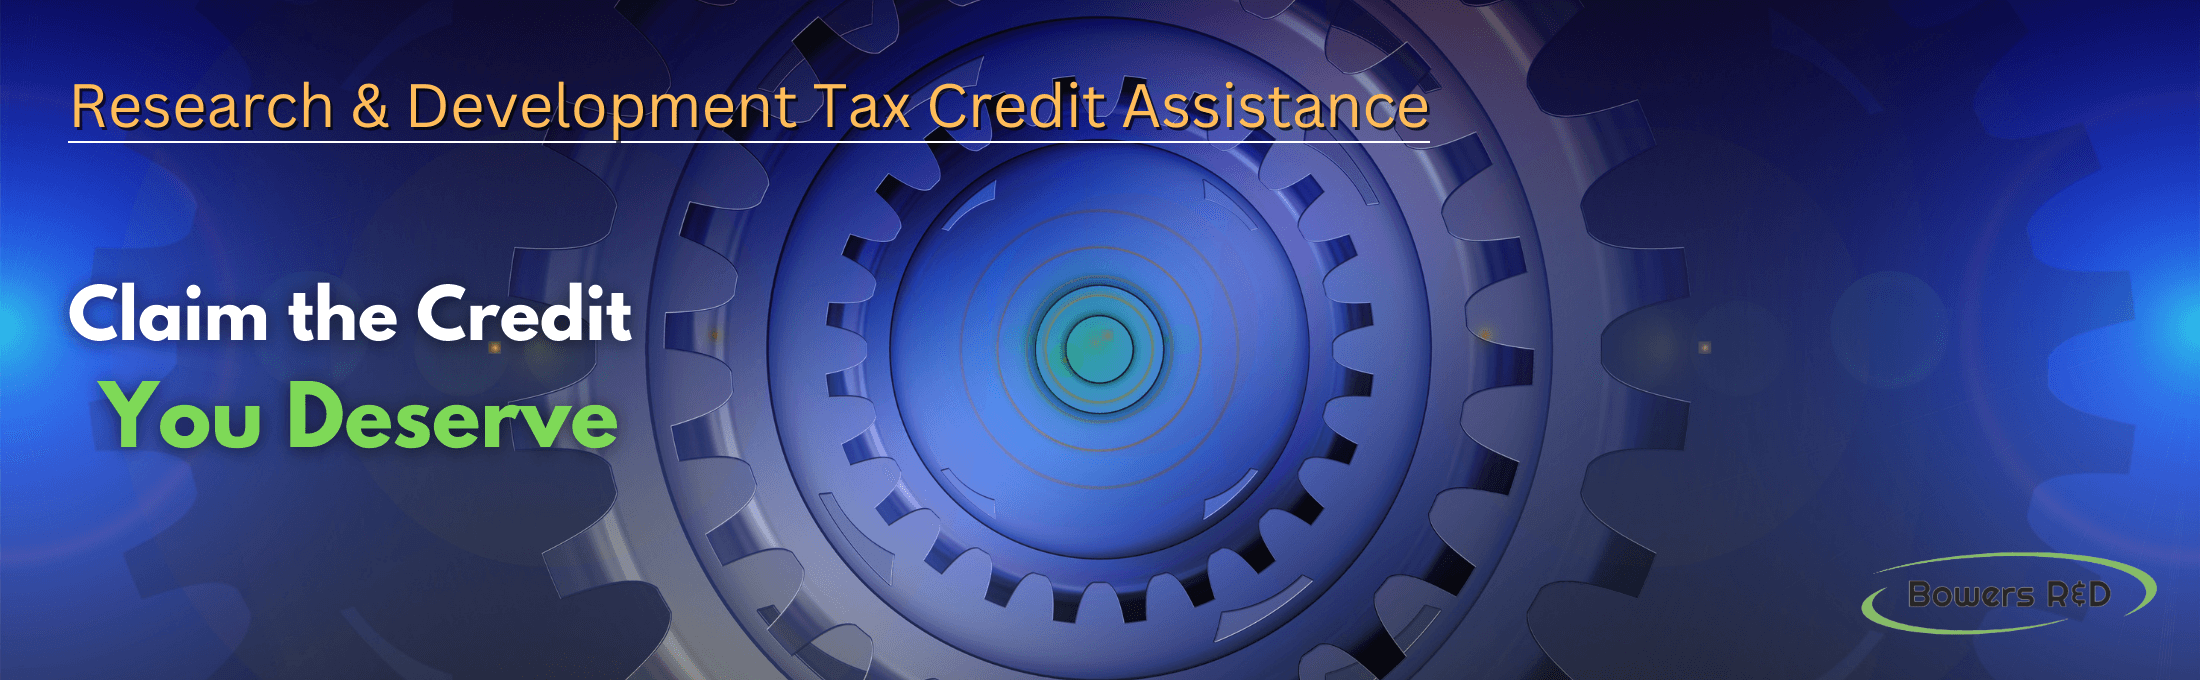 Research & Development Tax Credits - We'll help you claim the credit you deserve